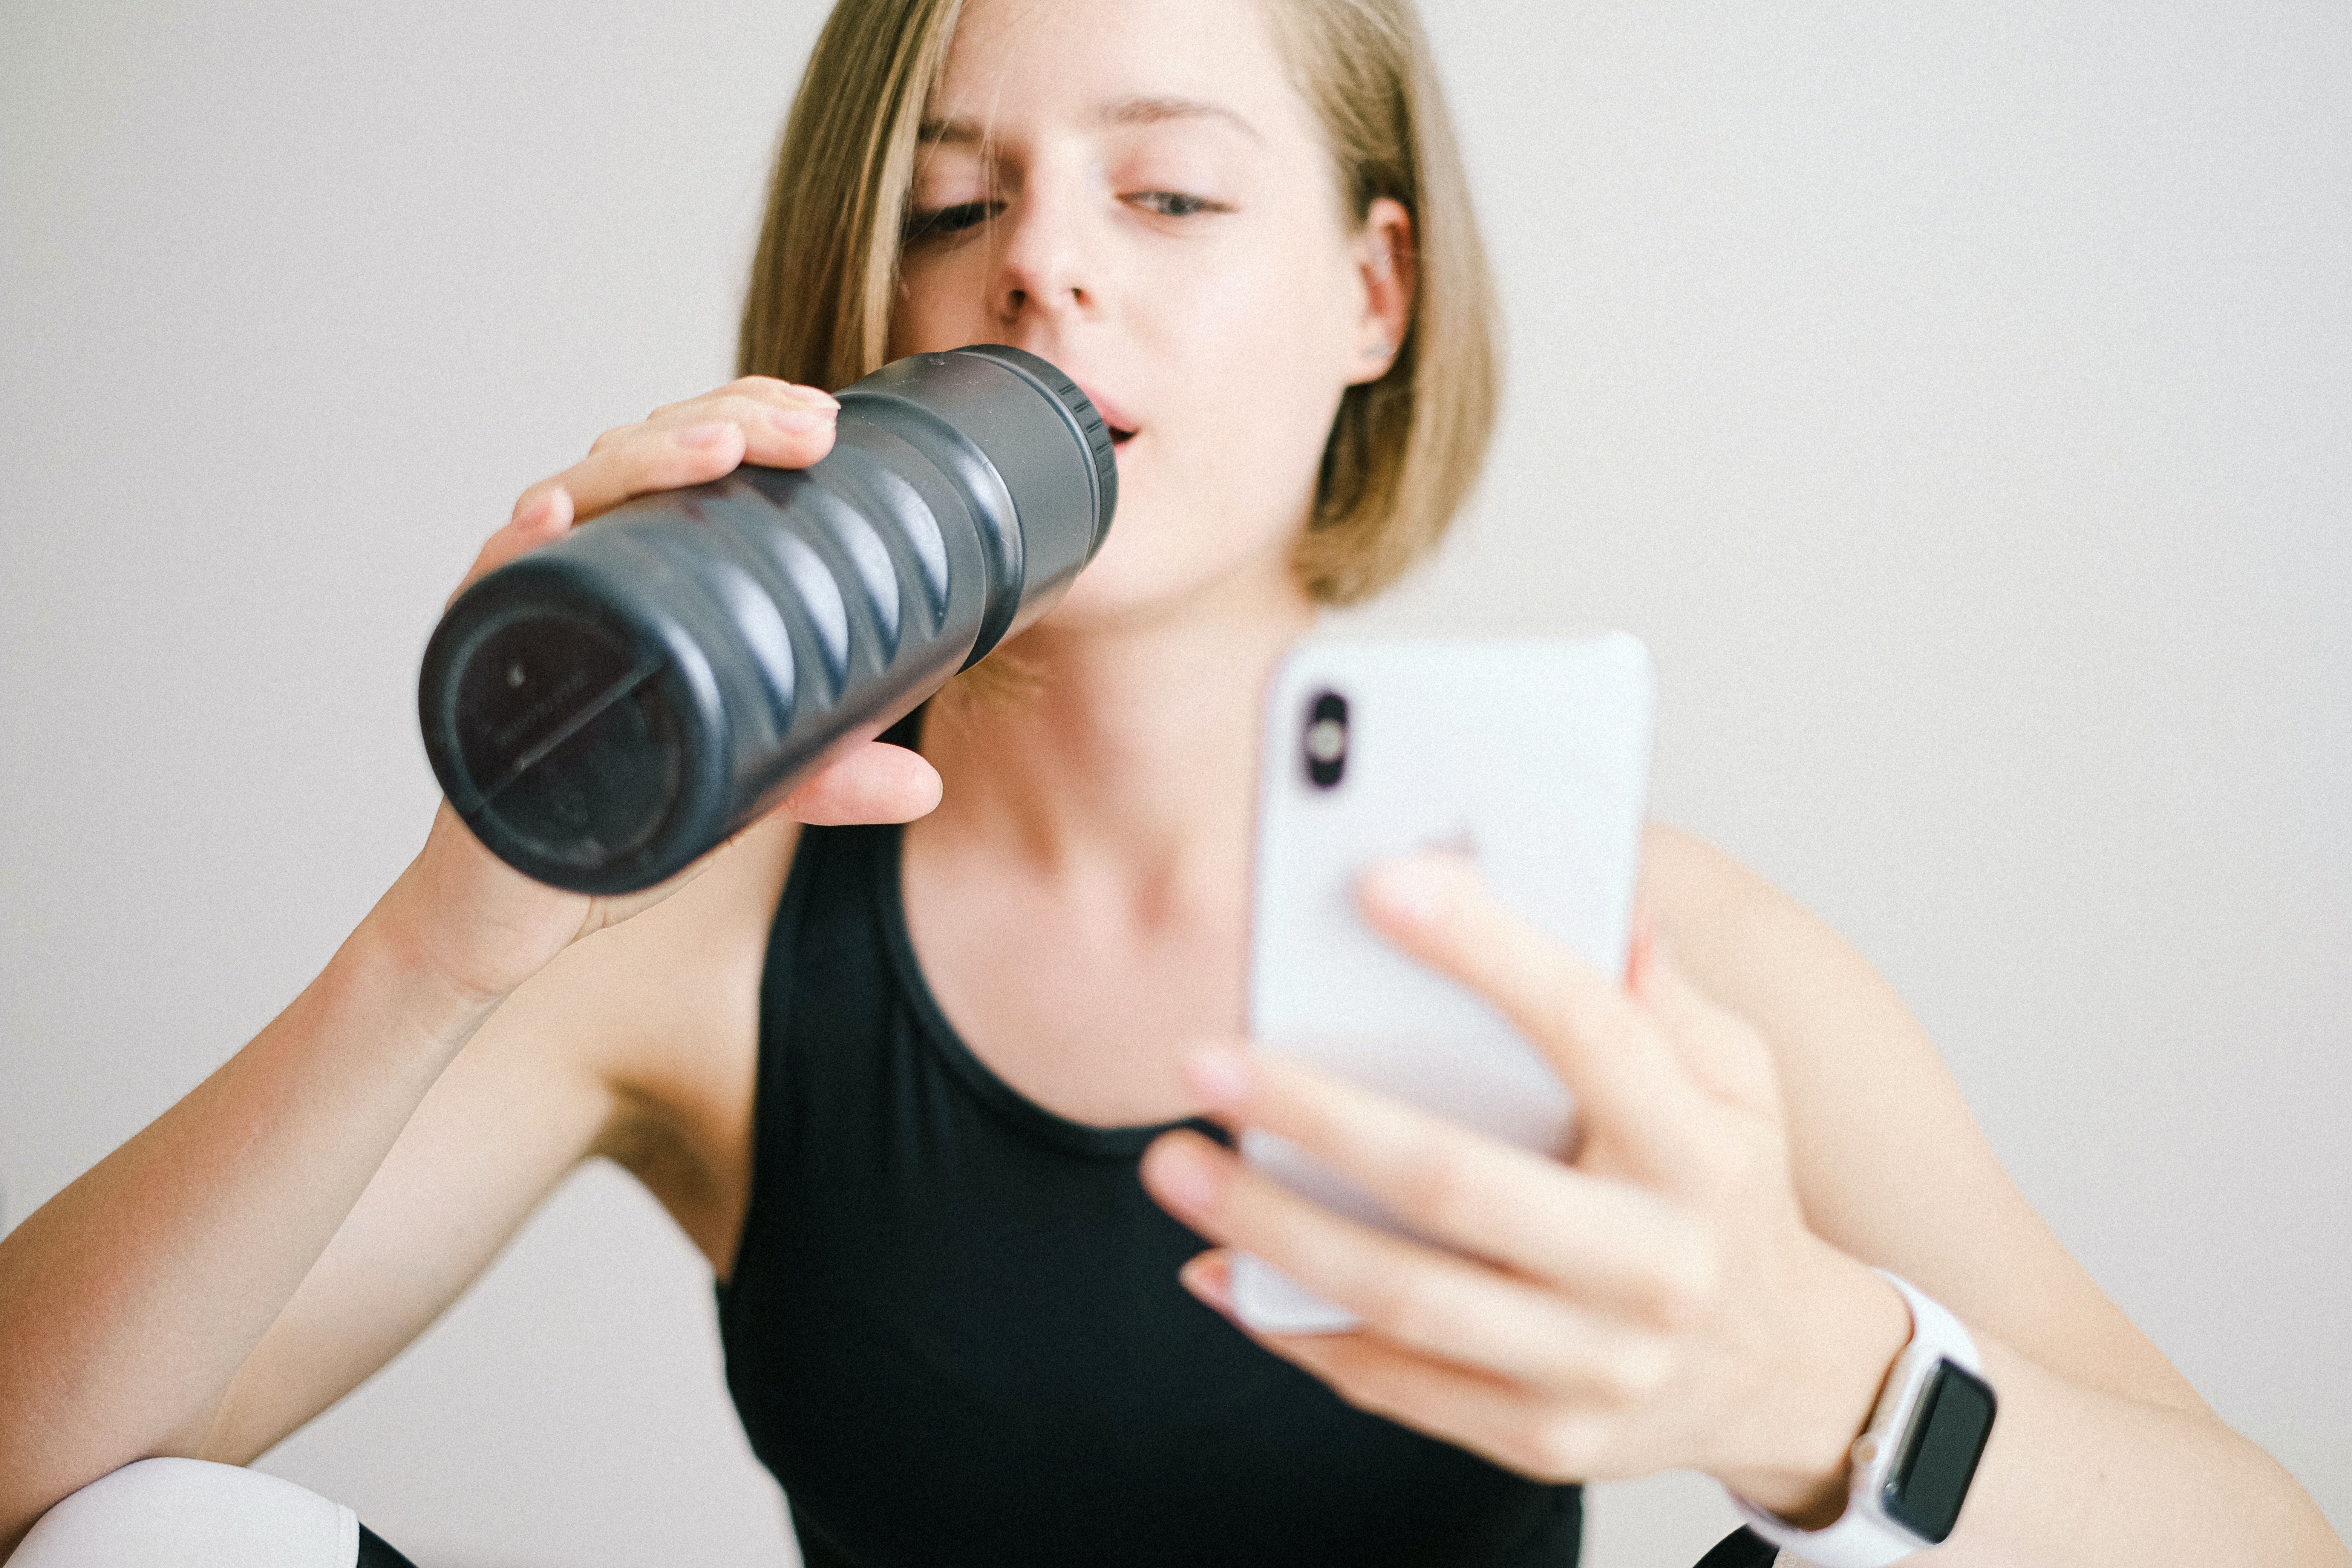 Fitness tech can encourage overuse and addiction